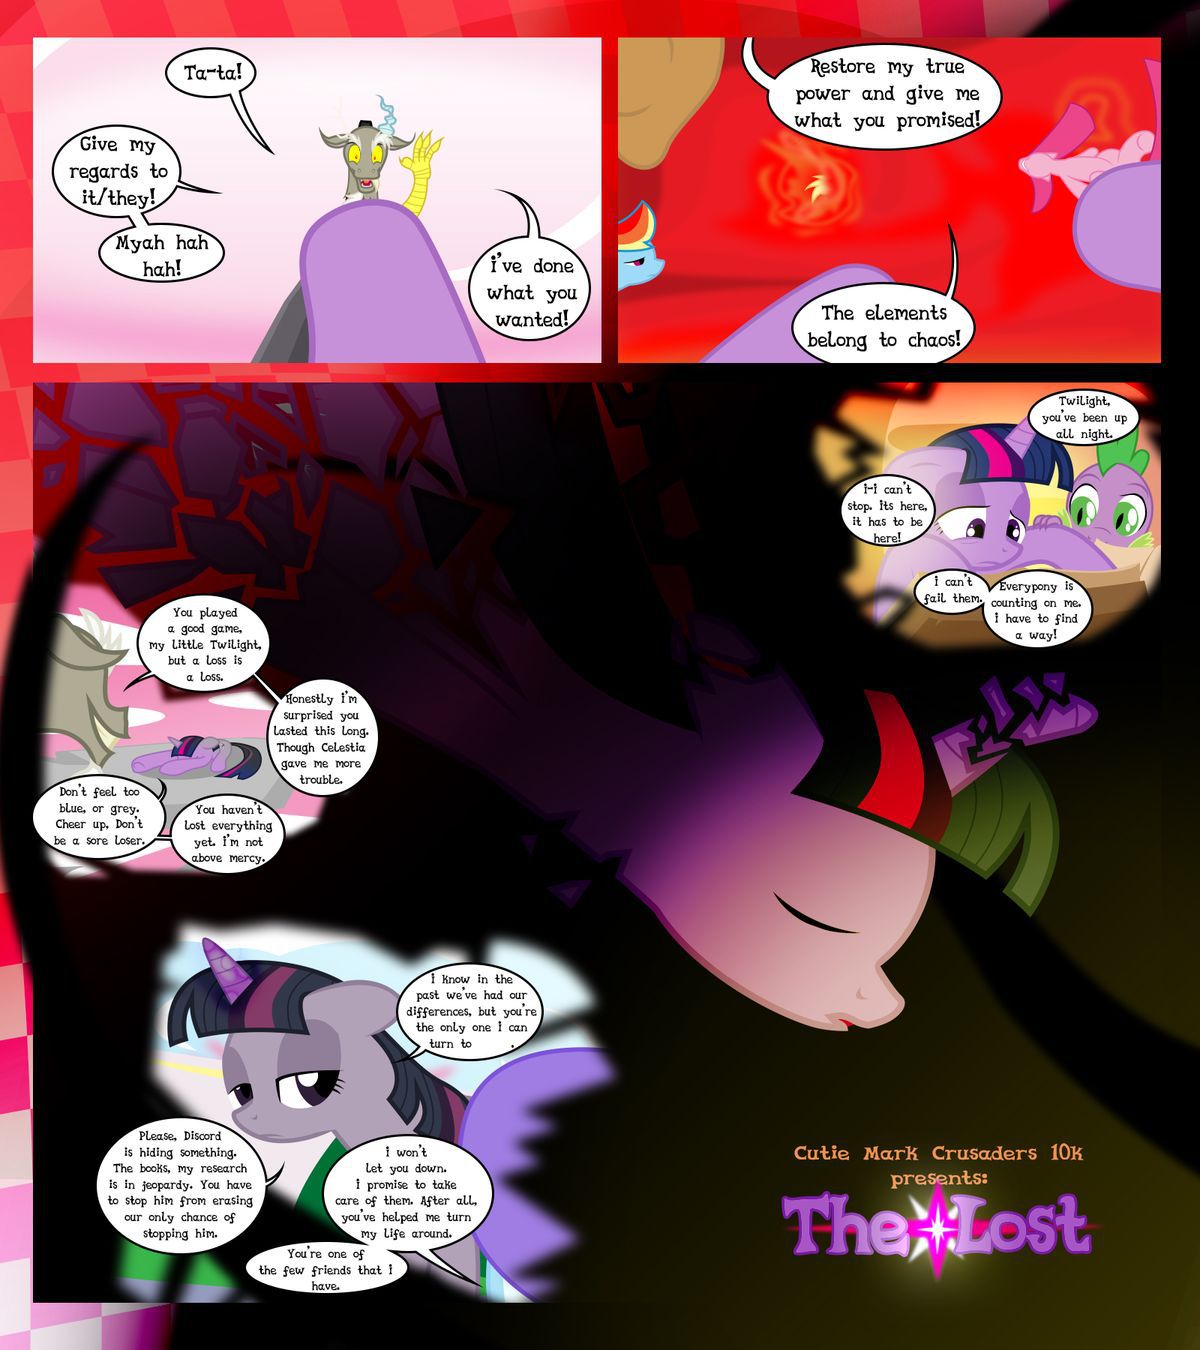 [GatesMcCloud] Cutie Mark Crusaders 10k: Chapter 3 - The Lost (My Little Pony: Friendship is Magic) [English] [Ongoing] 4